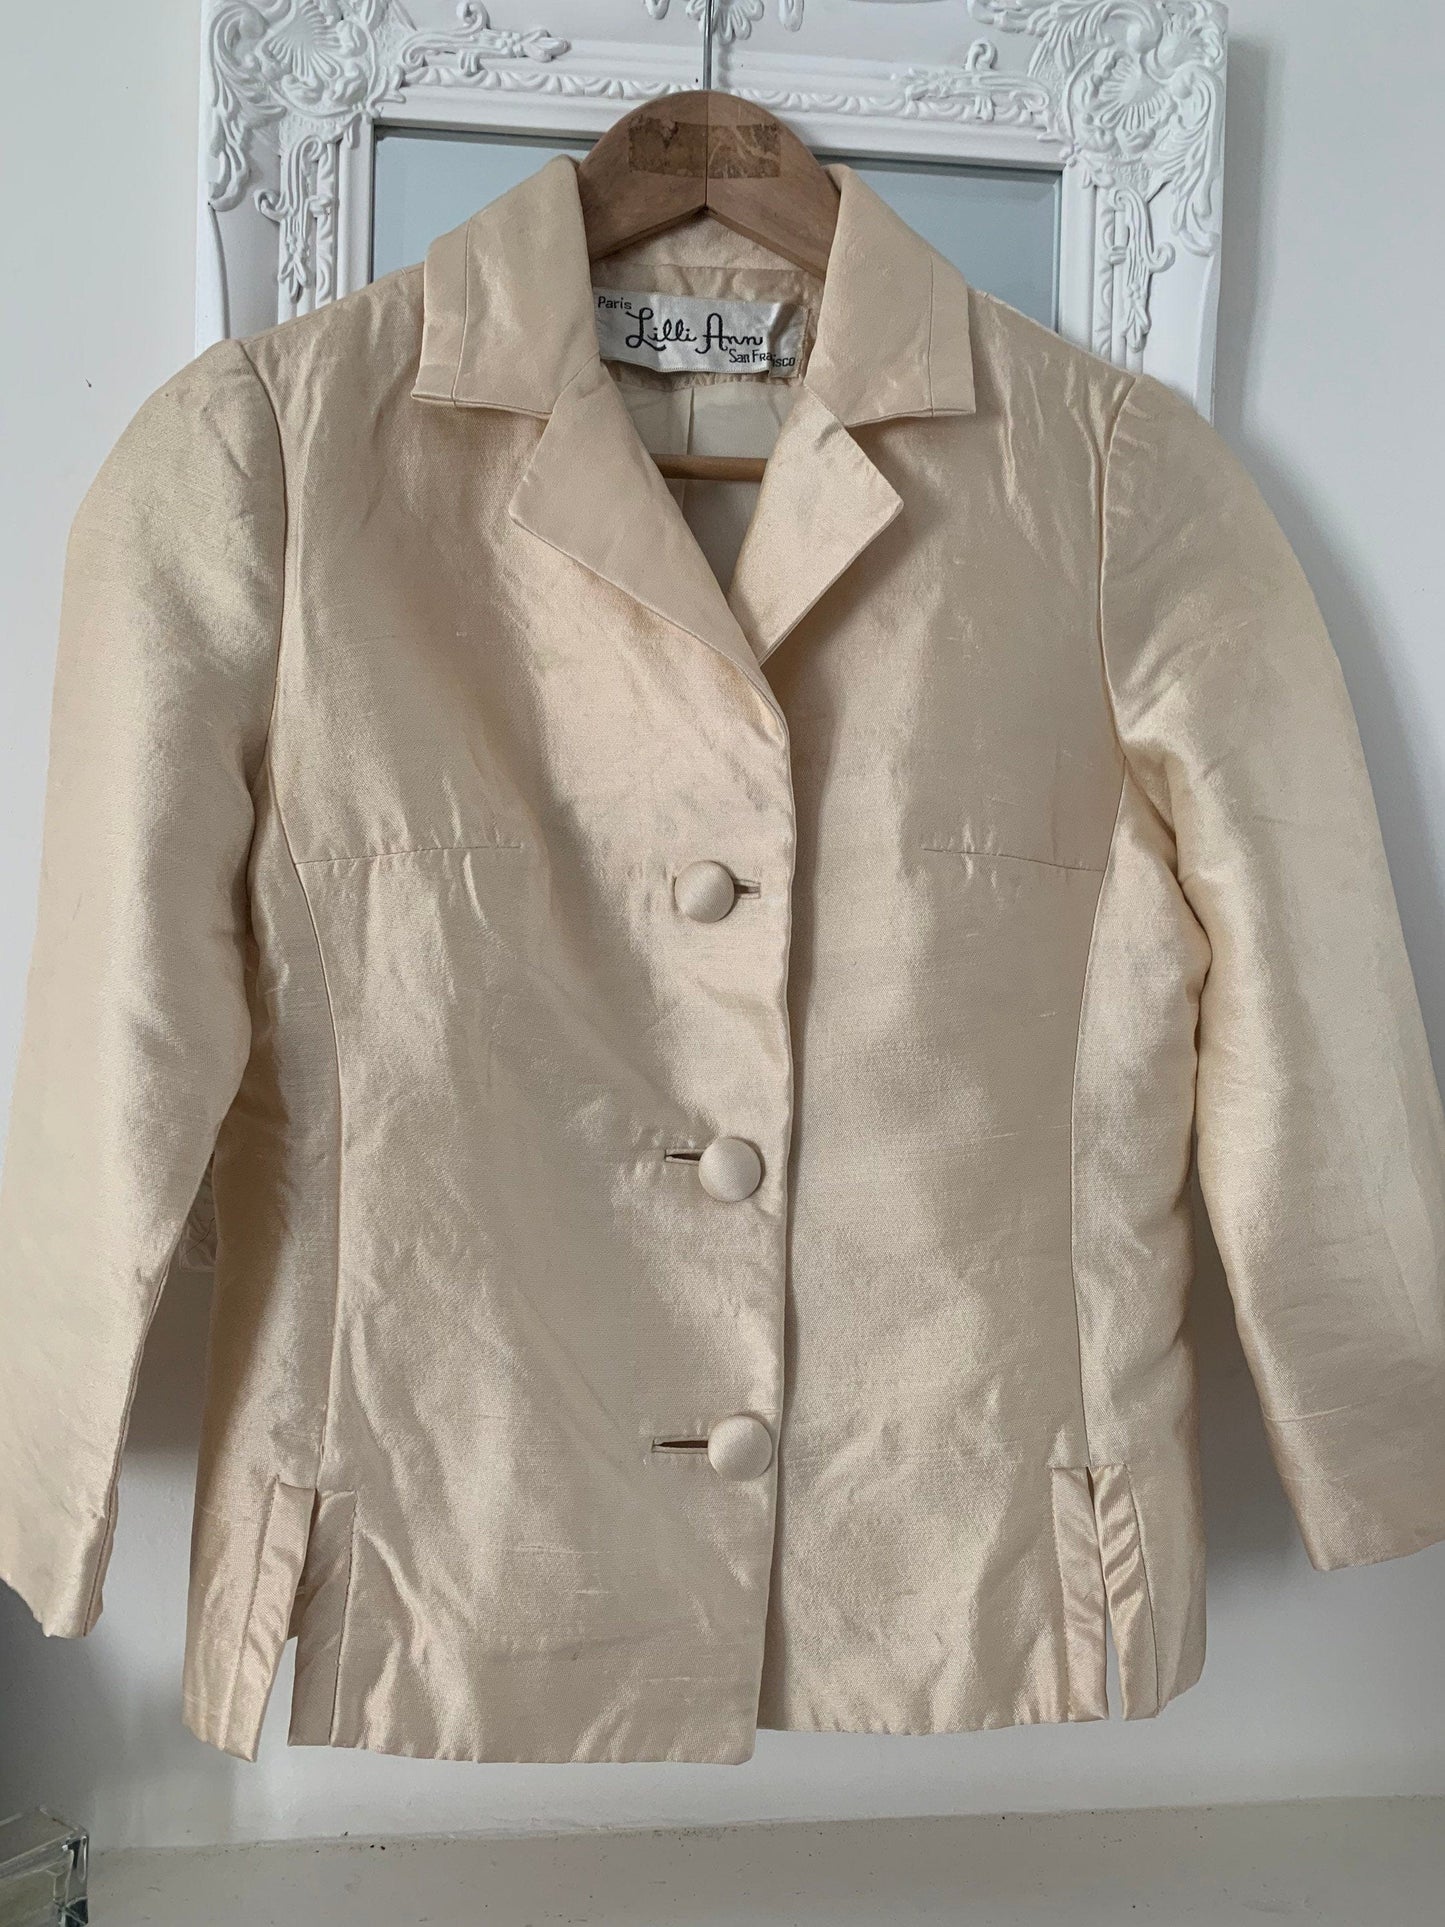 Vintage Lilli Ann Silk Jacket - Silk Chiffon Lined - Cream Gold Sheen Ladies Day Jacket Absolutely Stunning - 1950s Immaculate